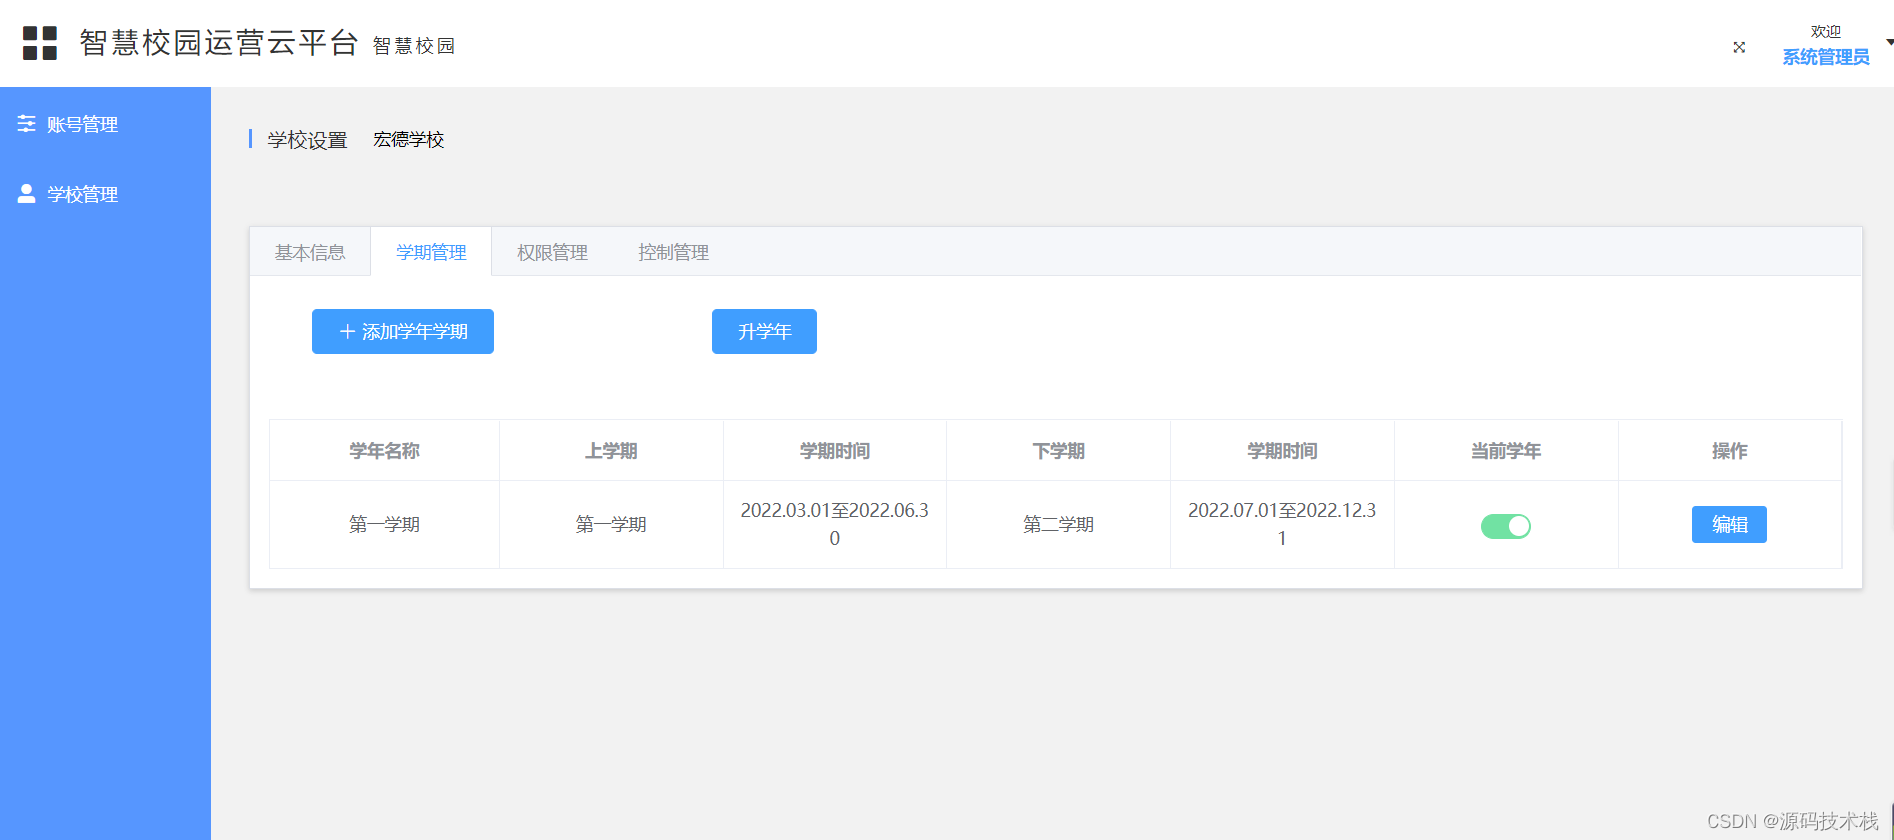 【Spring boot+VUE2+Android 7.1】智慧校园源码